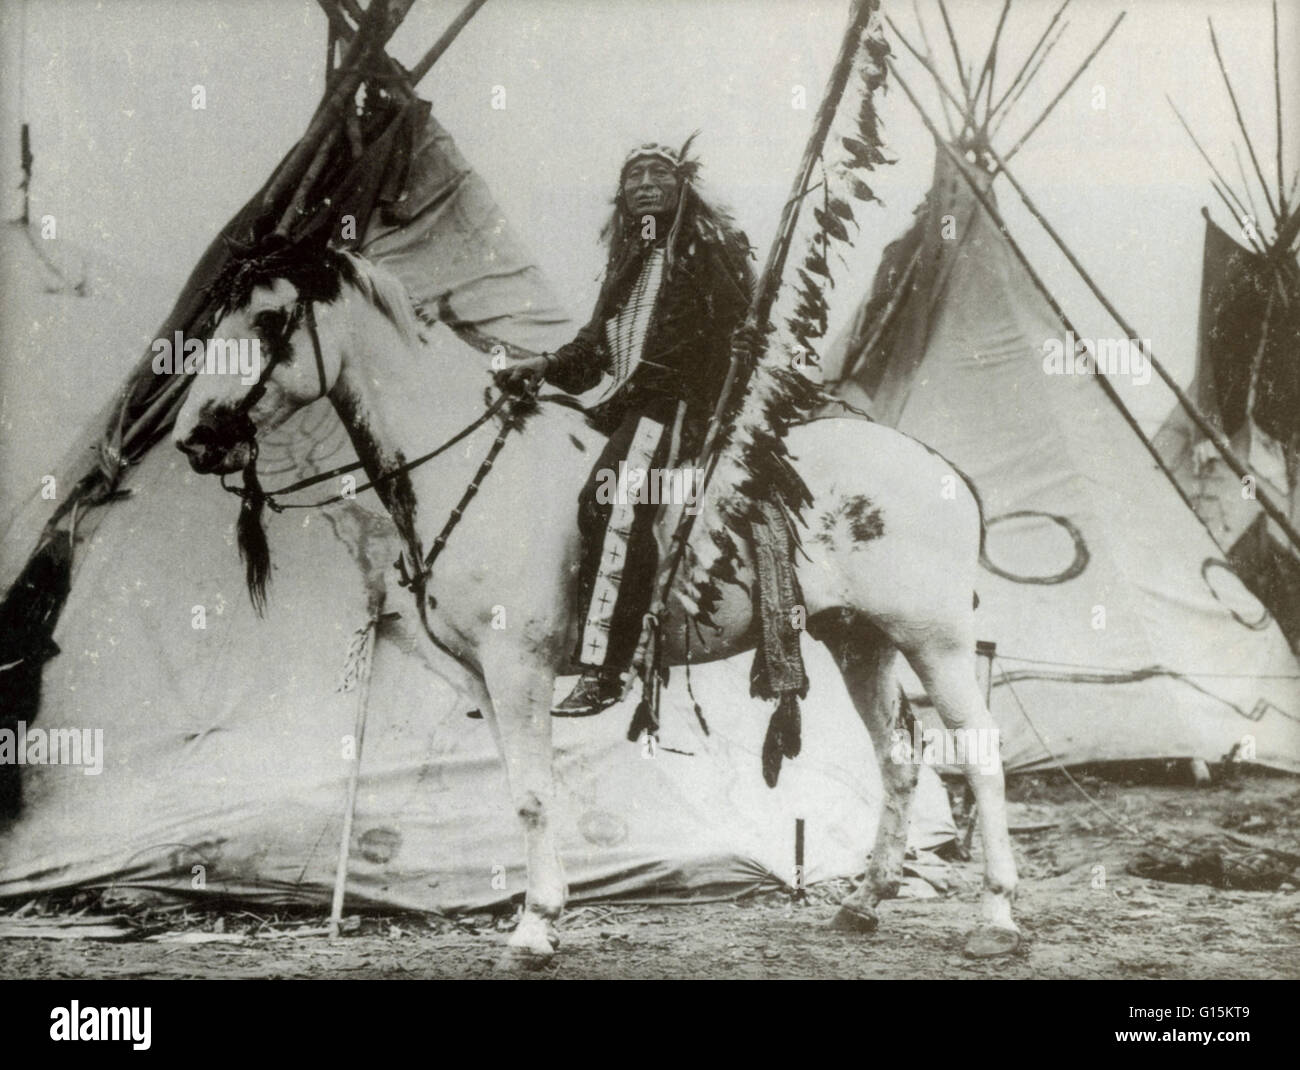 Tail was a Sioux Chief who fought in both the Battle of Little Bighorn and at Wounded Knee. Later he performed Buffalo Bill's Wild West Show, and was a model